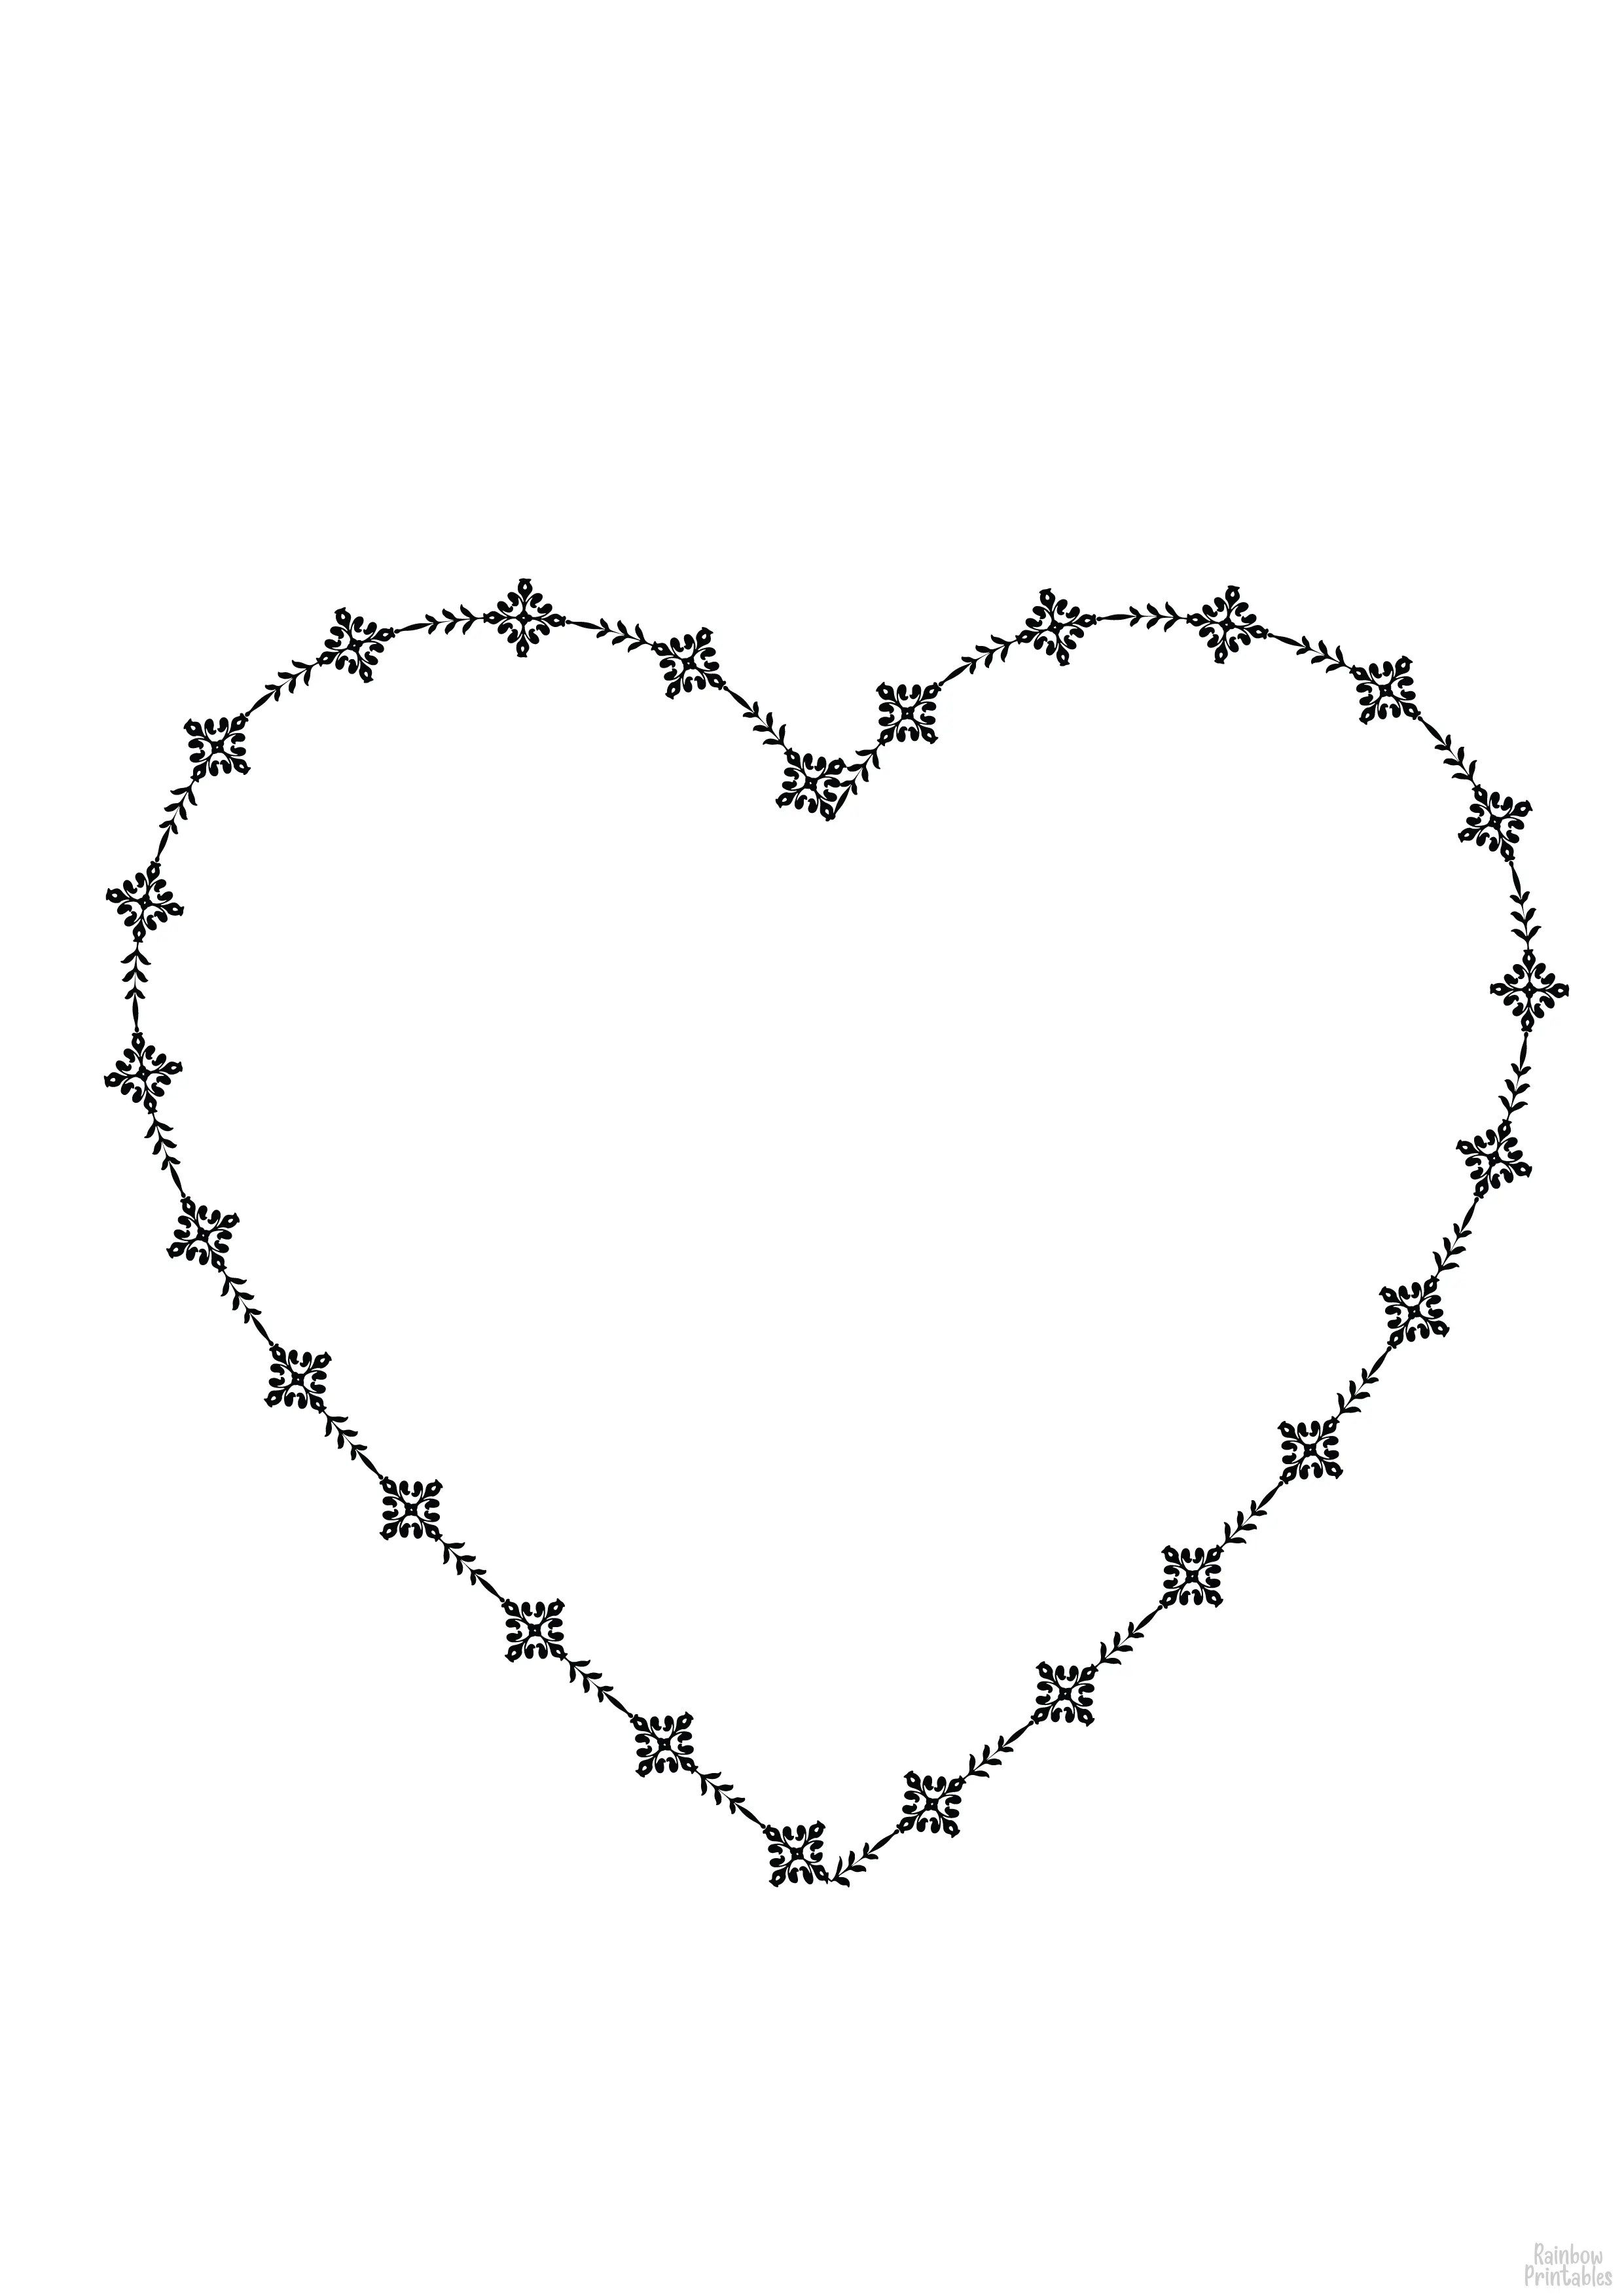 Valentine DAY PAGE FRAMES HEART SHAPE Clipart Coloring Pages for Kids Adults Art Activities Line Art